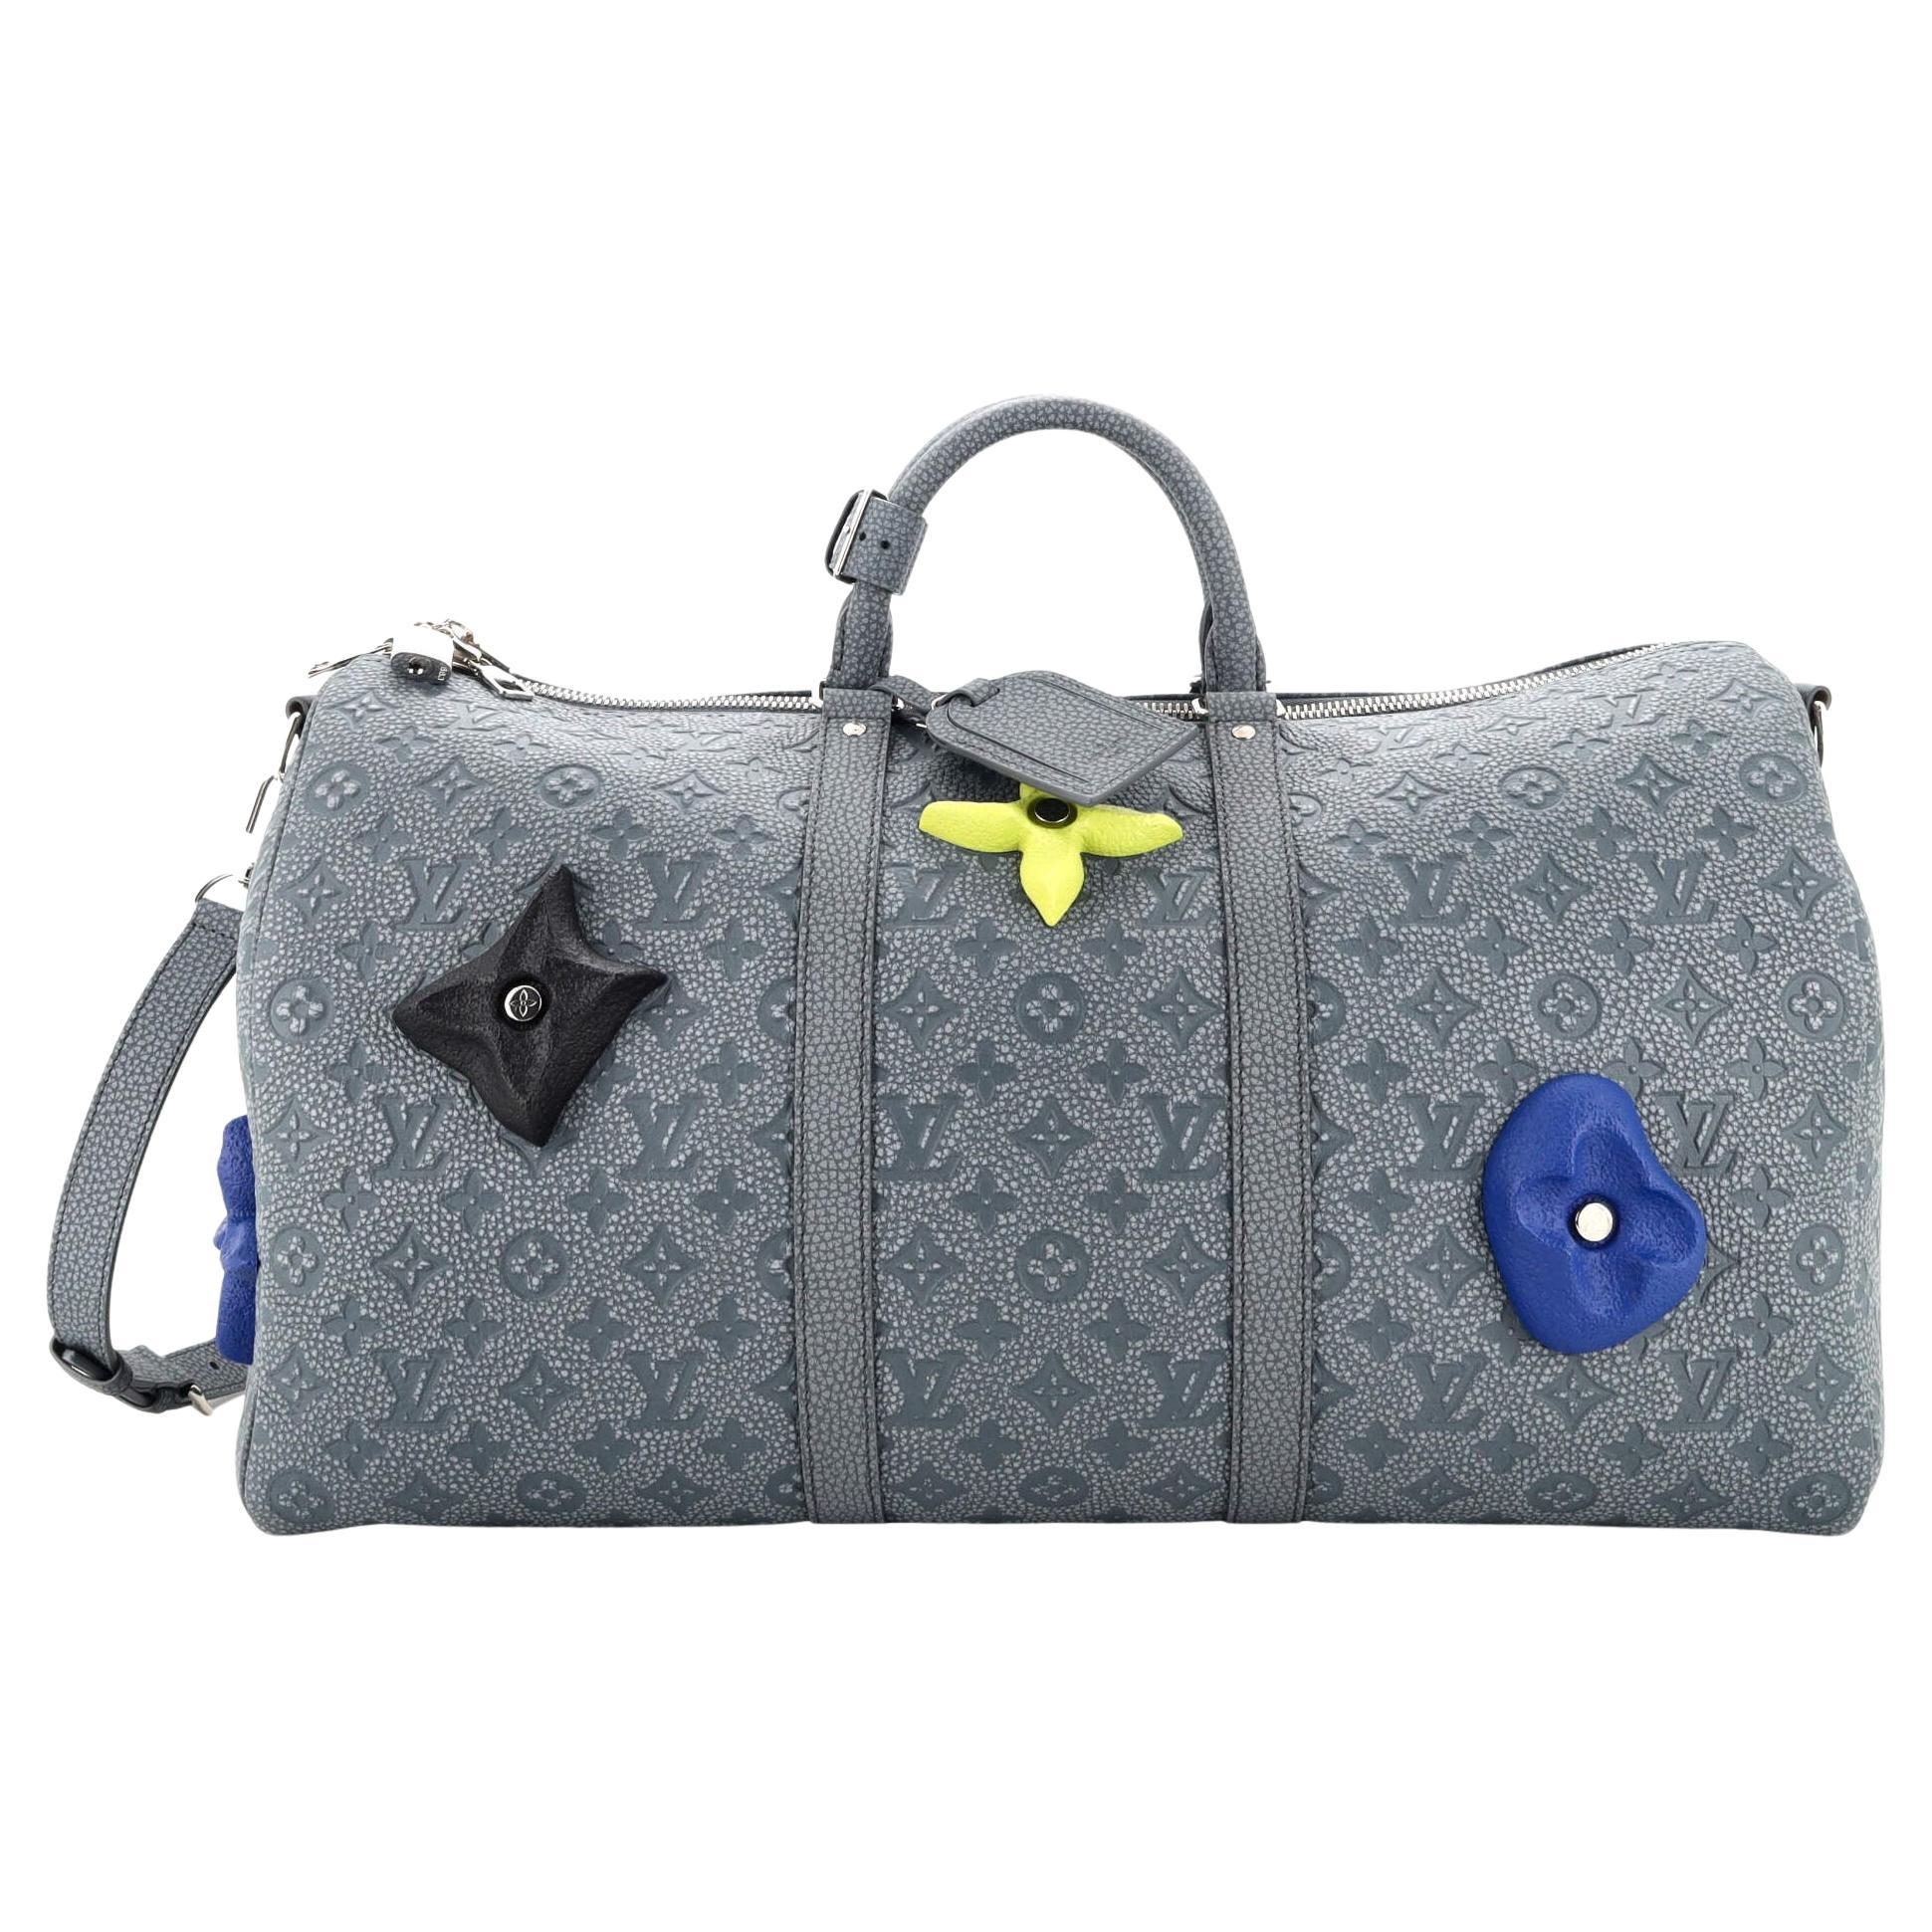 Keepall Bandouliere Bag Limited Edition Illusion Monogram Taurillon Leather  50